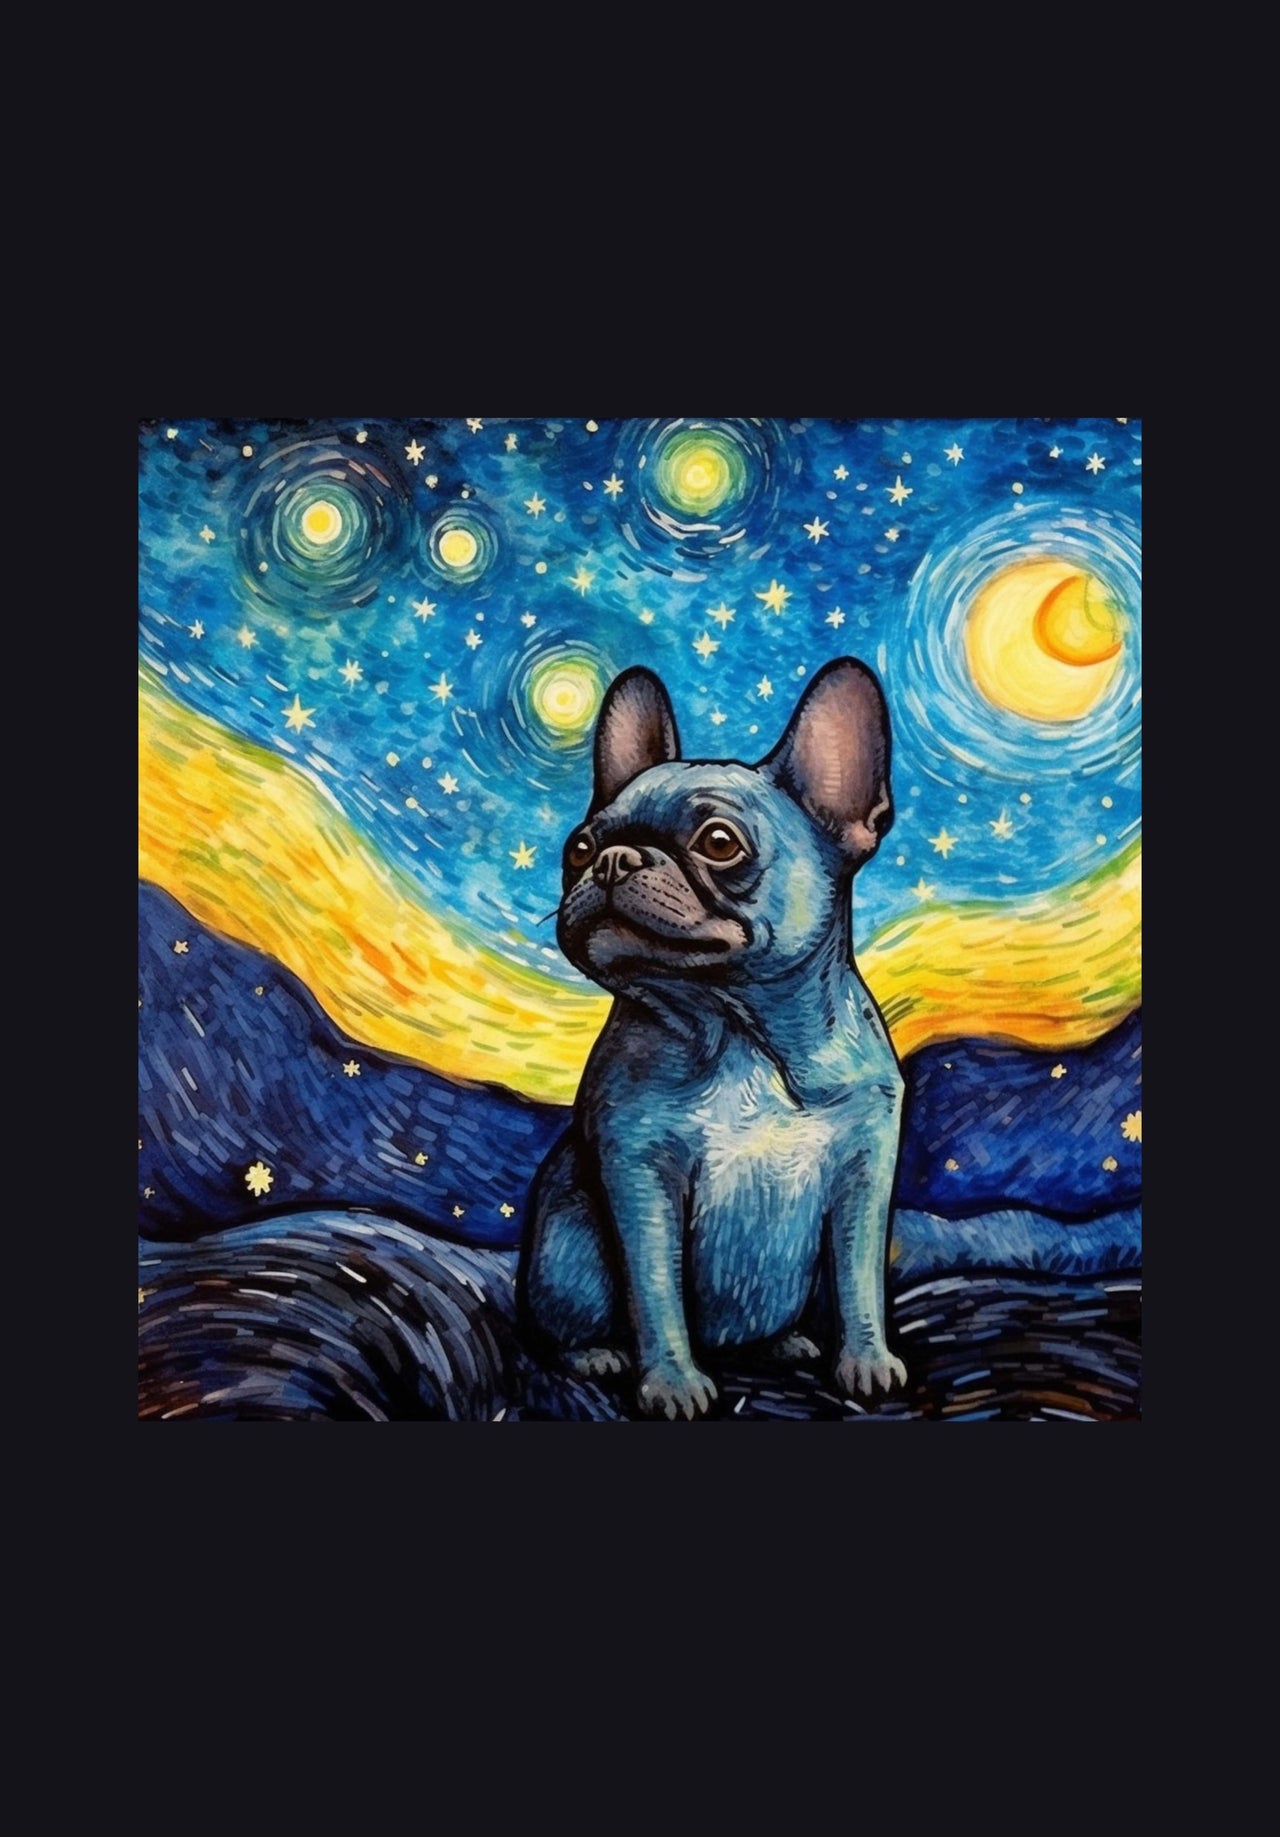 Drawings French Bulldog 03 Van Goh Style Vintage Framed Canvas Prints Wall Art Hanging Home Decor